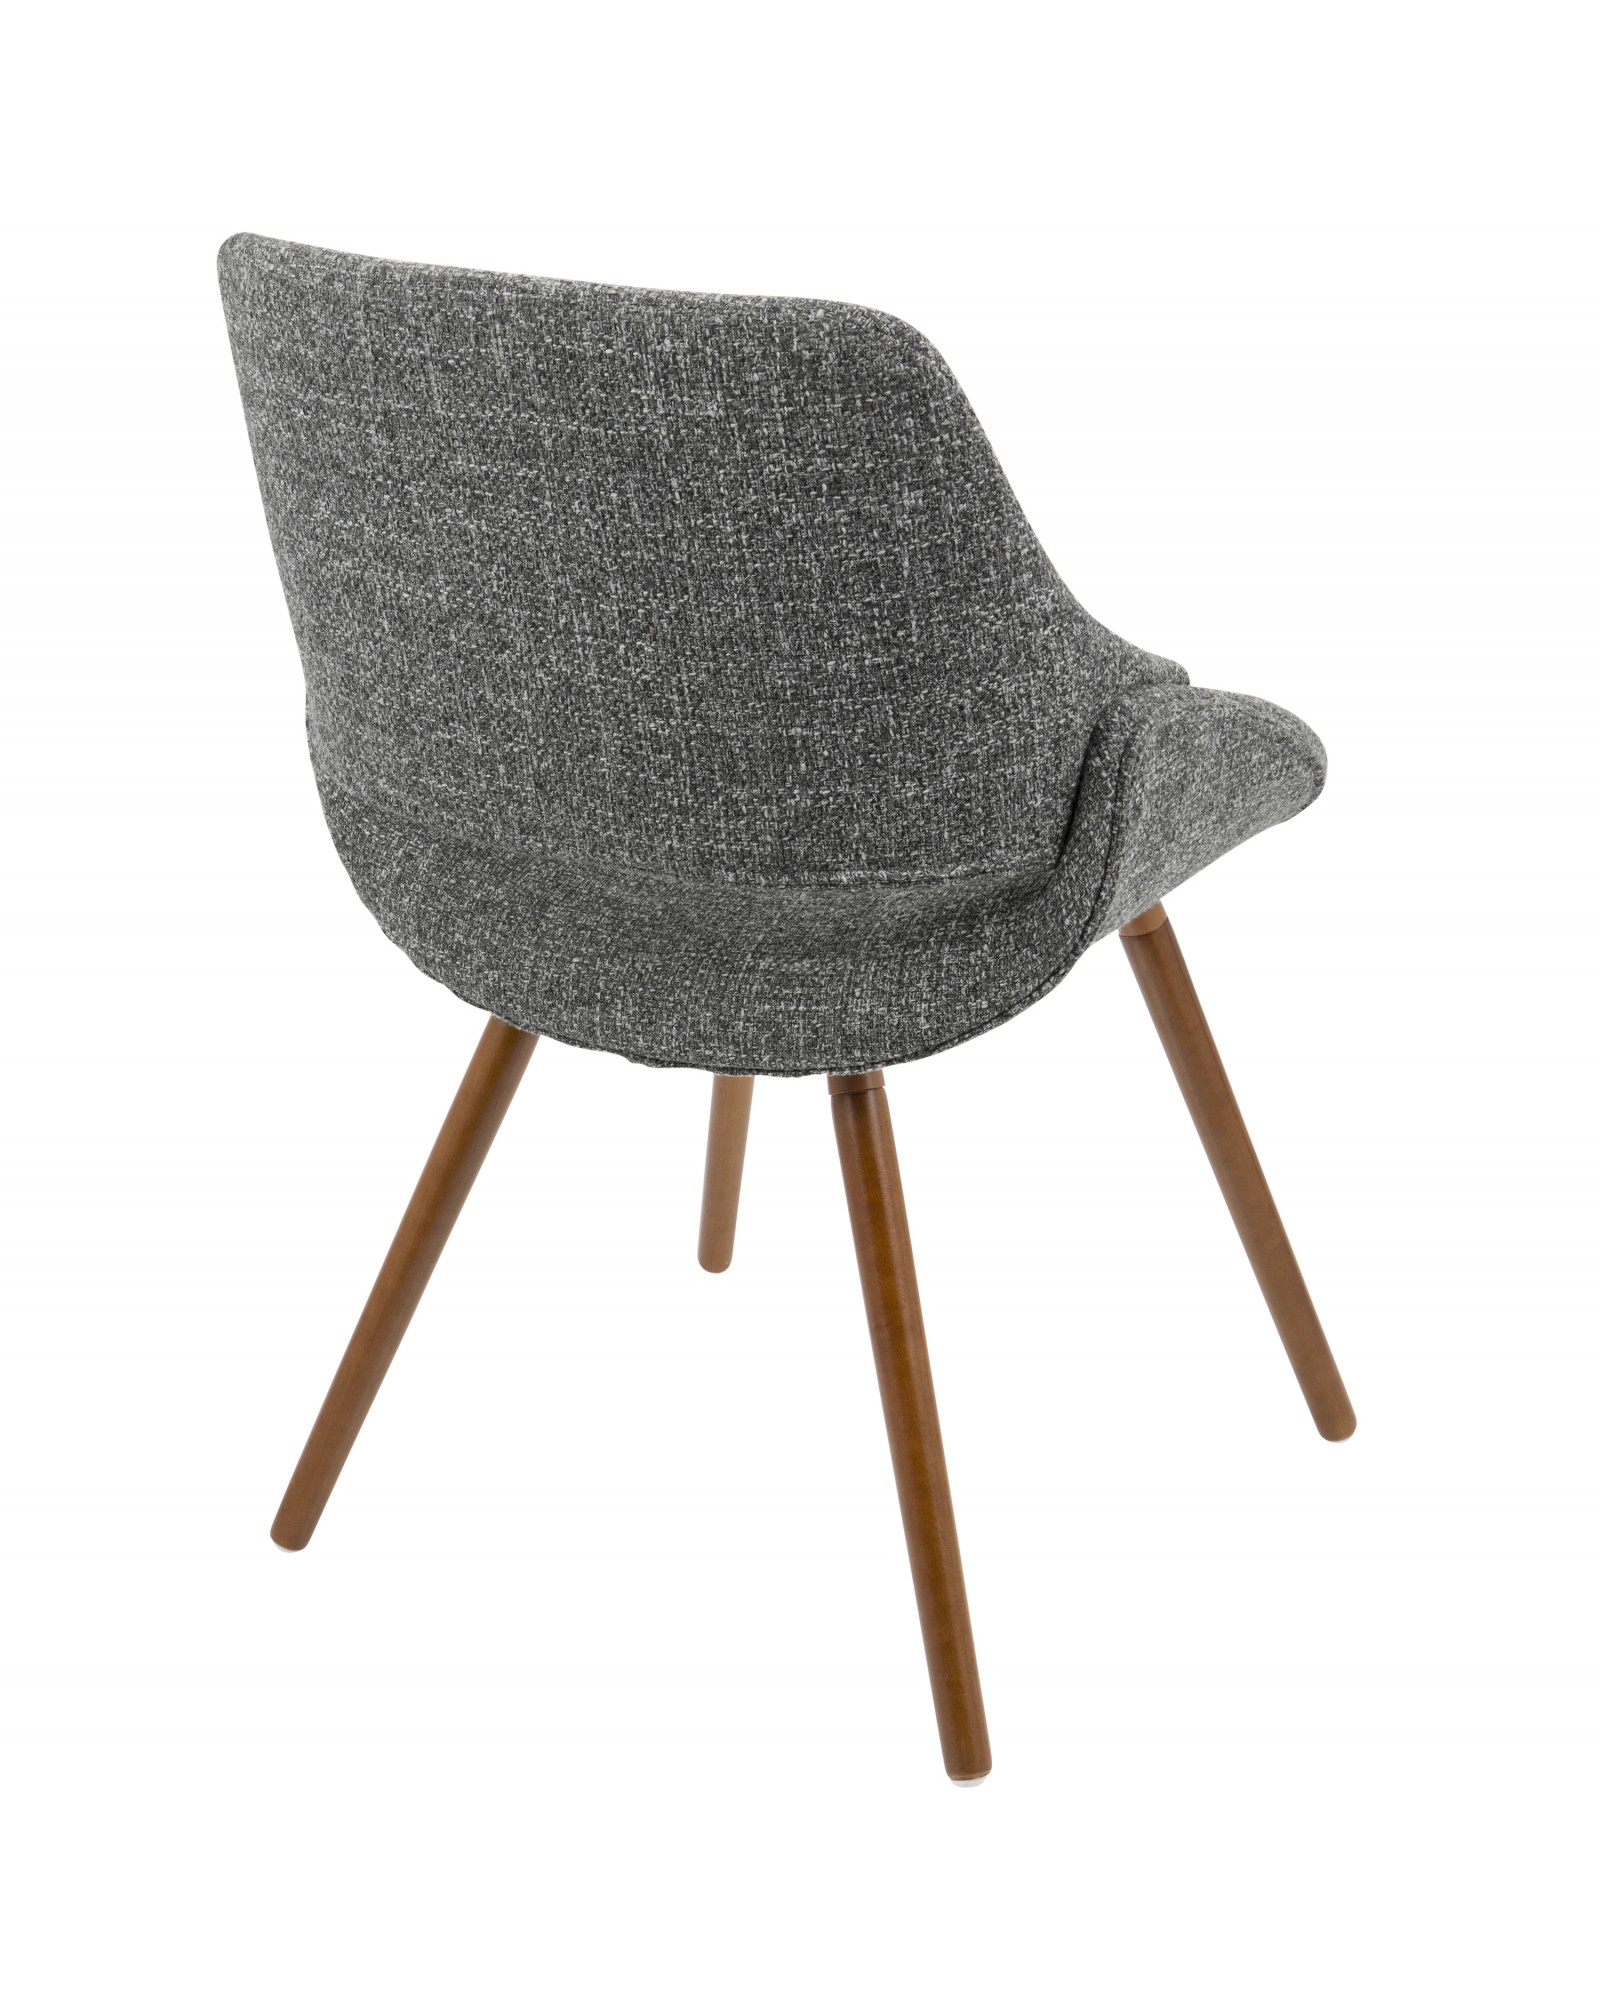 Fabrico Mid-Century Modern Dining/Accent Chair in Walnut and Grey Noise Fabric - Set of 2